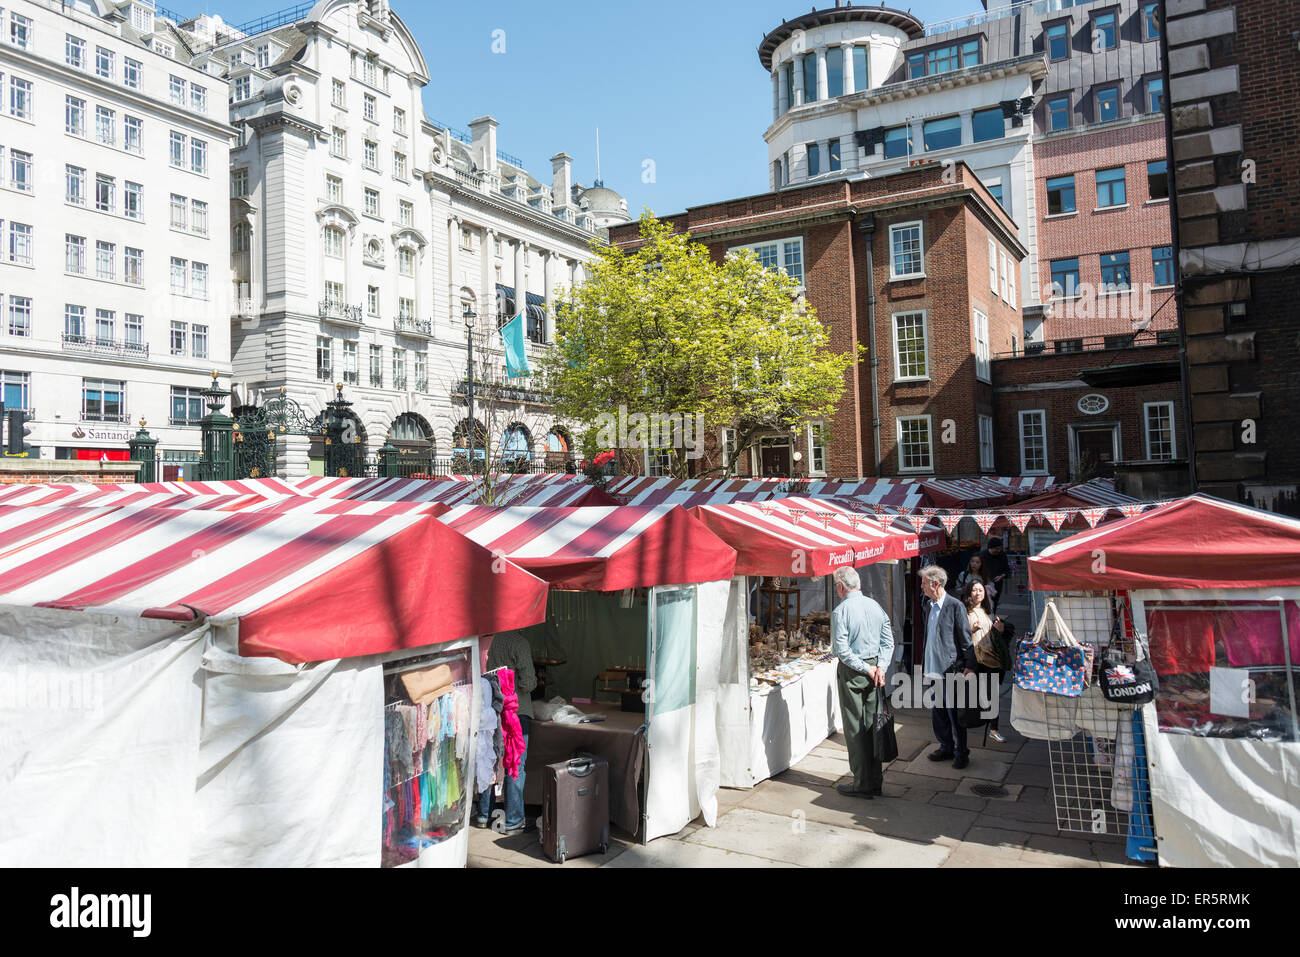 St. James Piccadilly Market, Piccadilly, City of Westminster, London, England, United Kingdom Stock Photo